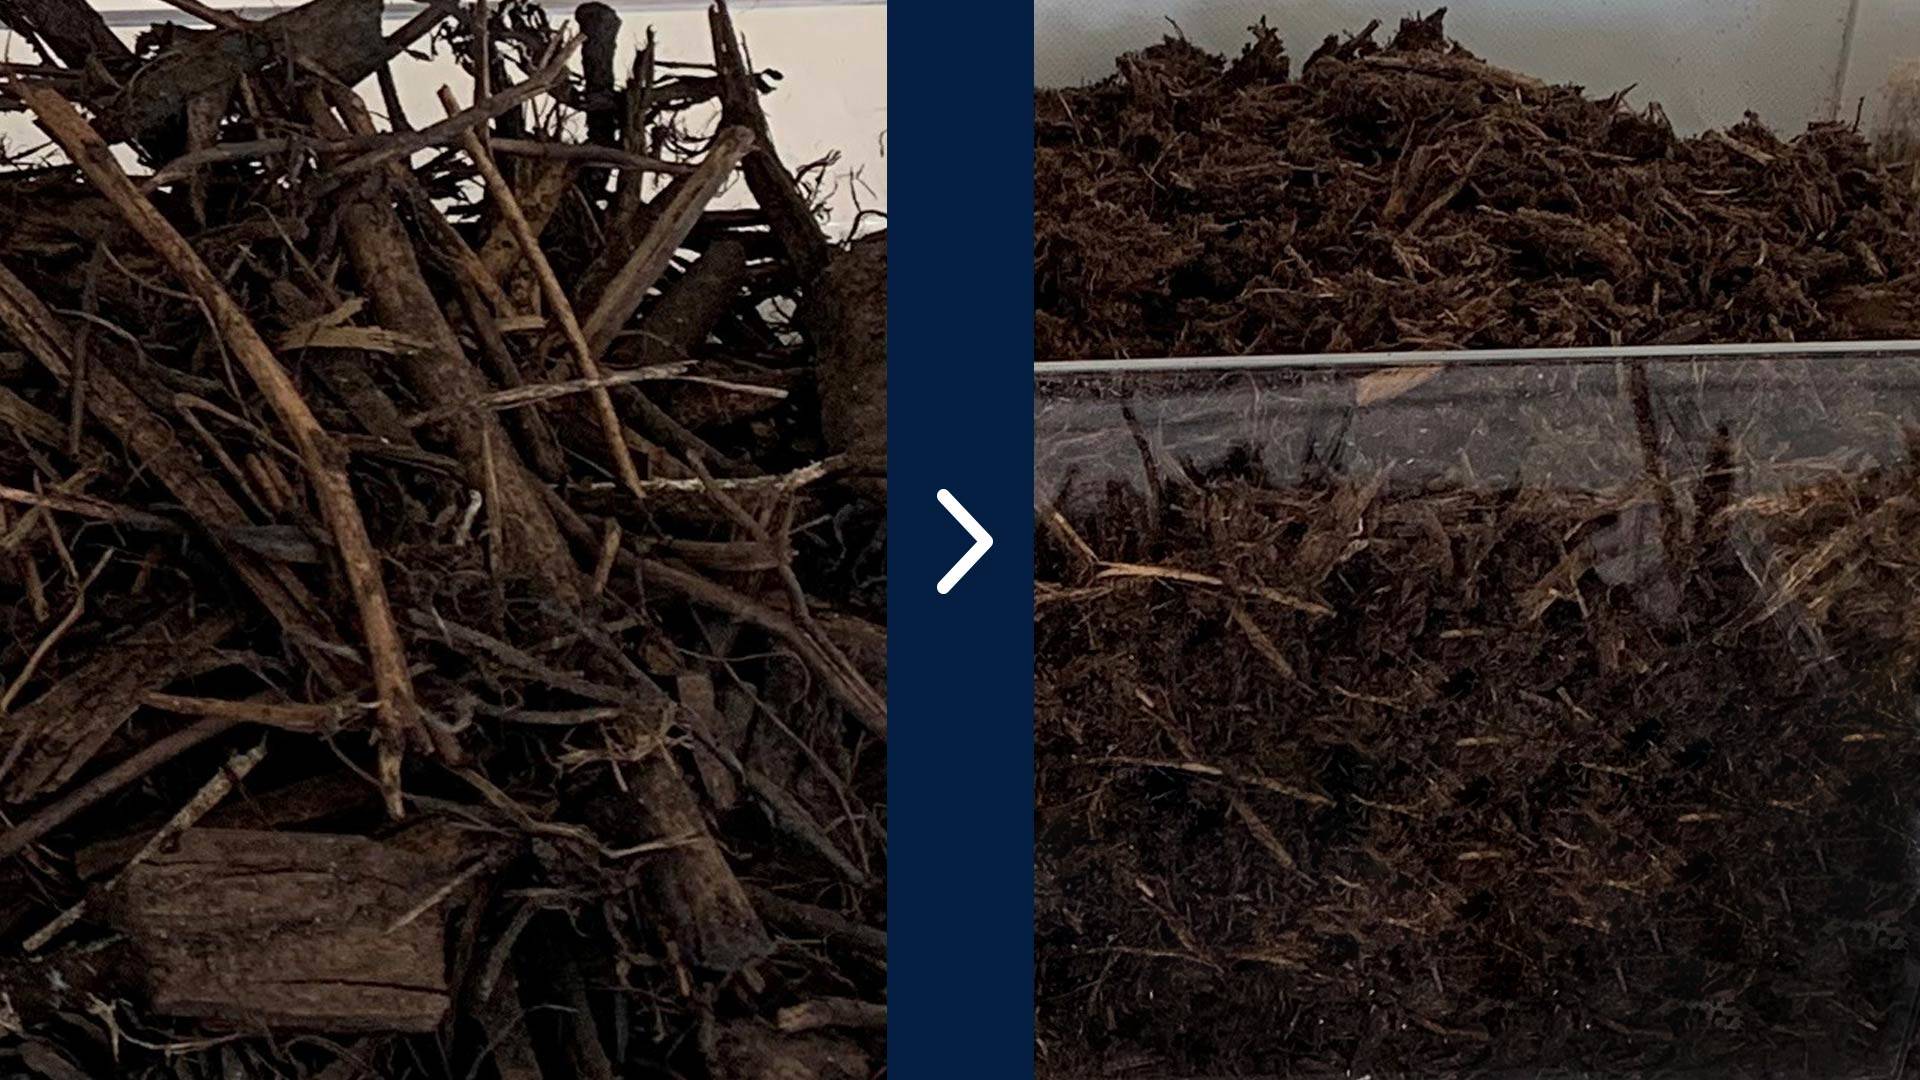 The outcome of the processing of compost wood using the wood fiber machine.